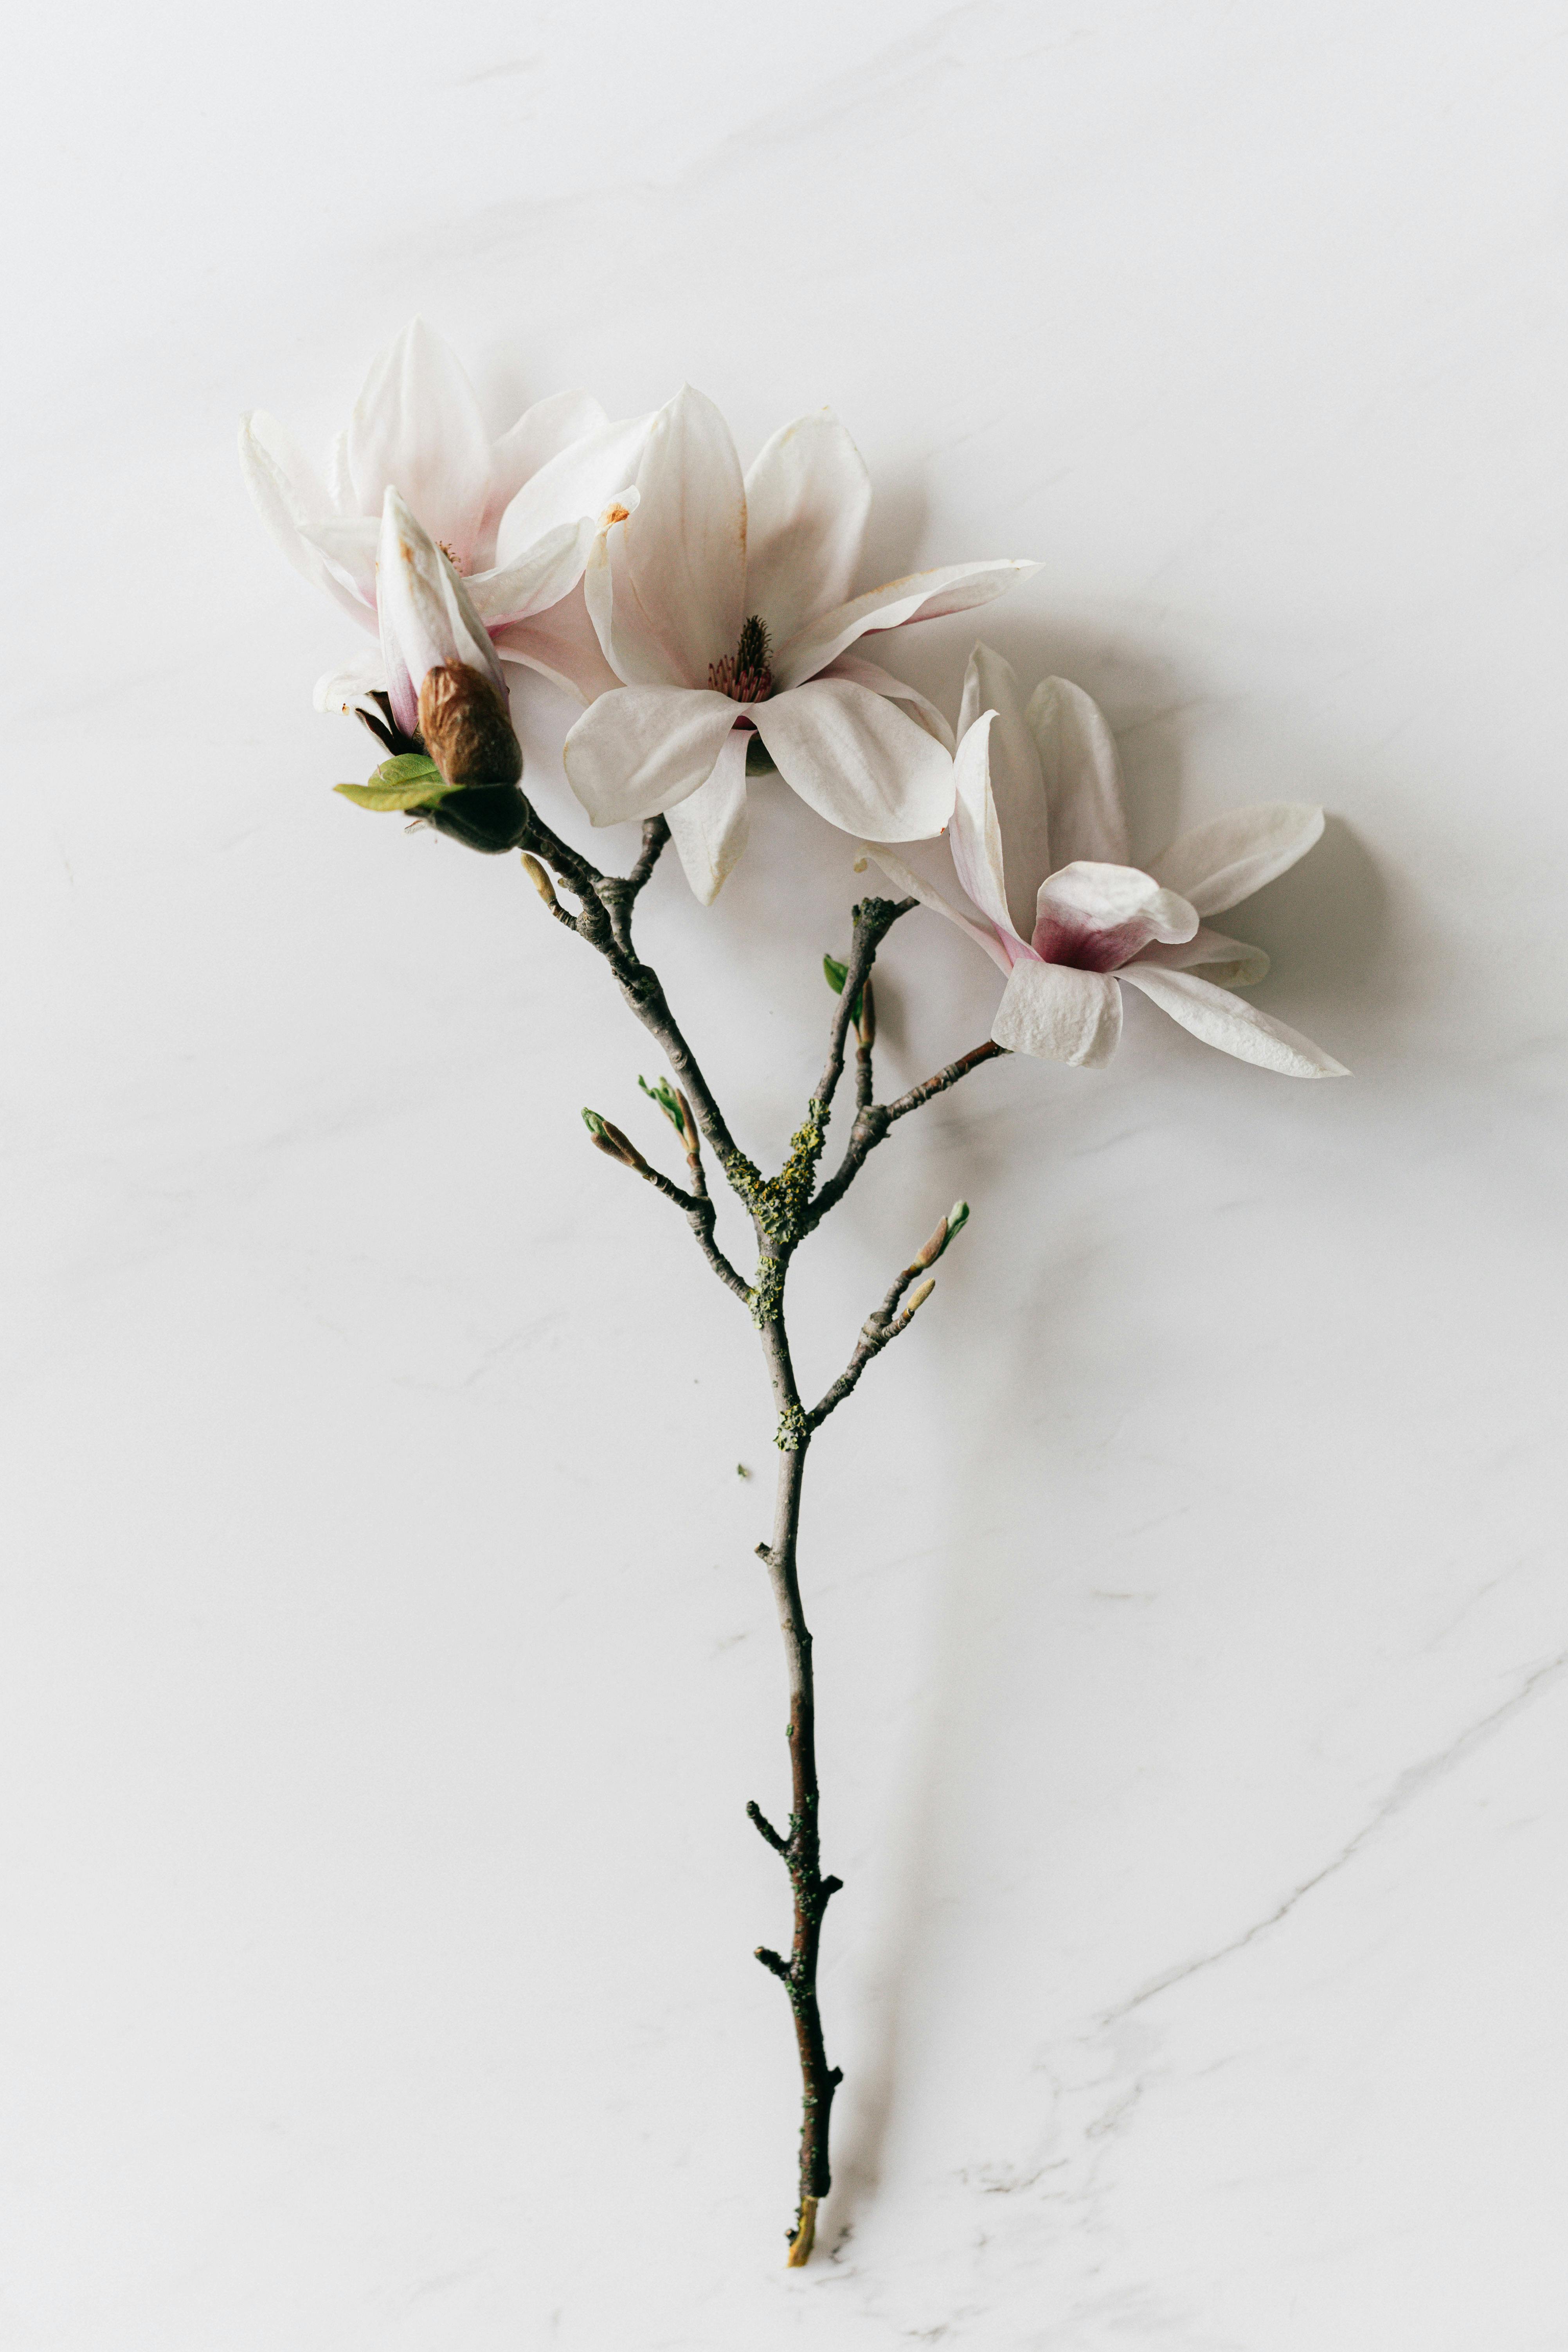 100 White Flower Pictures  Download Free Images on Unsplash